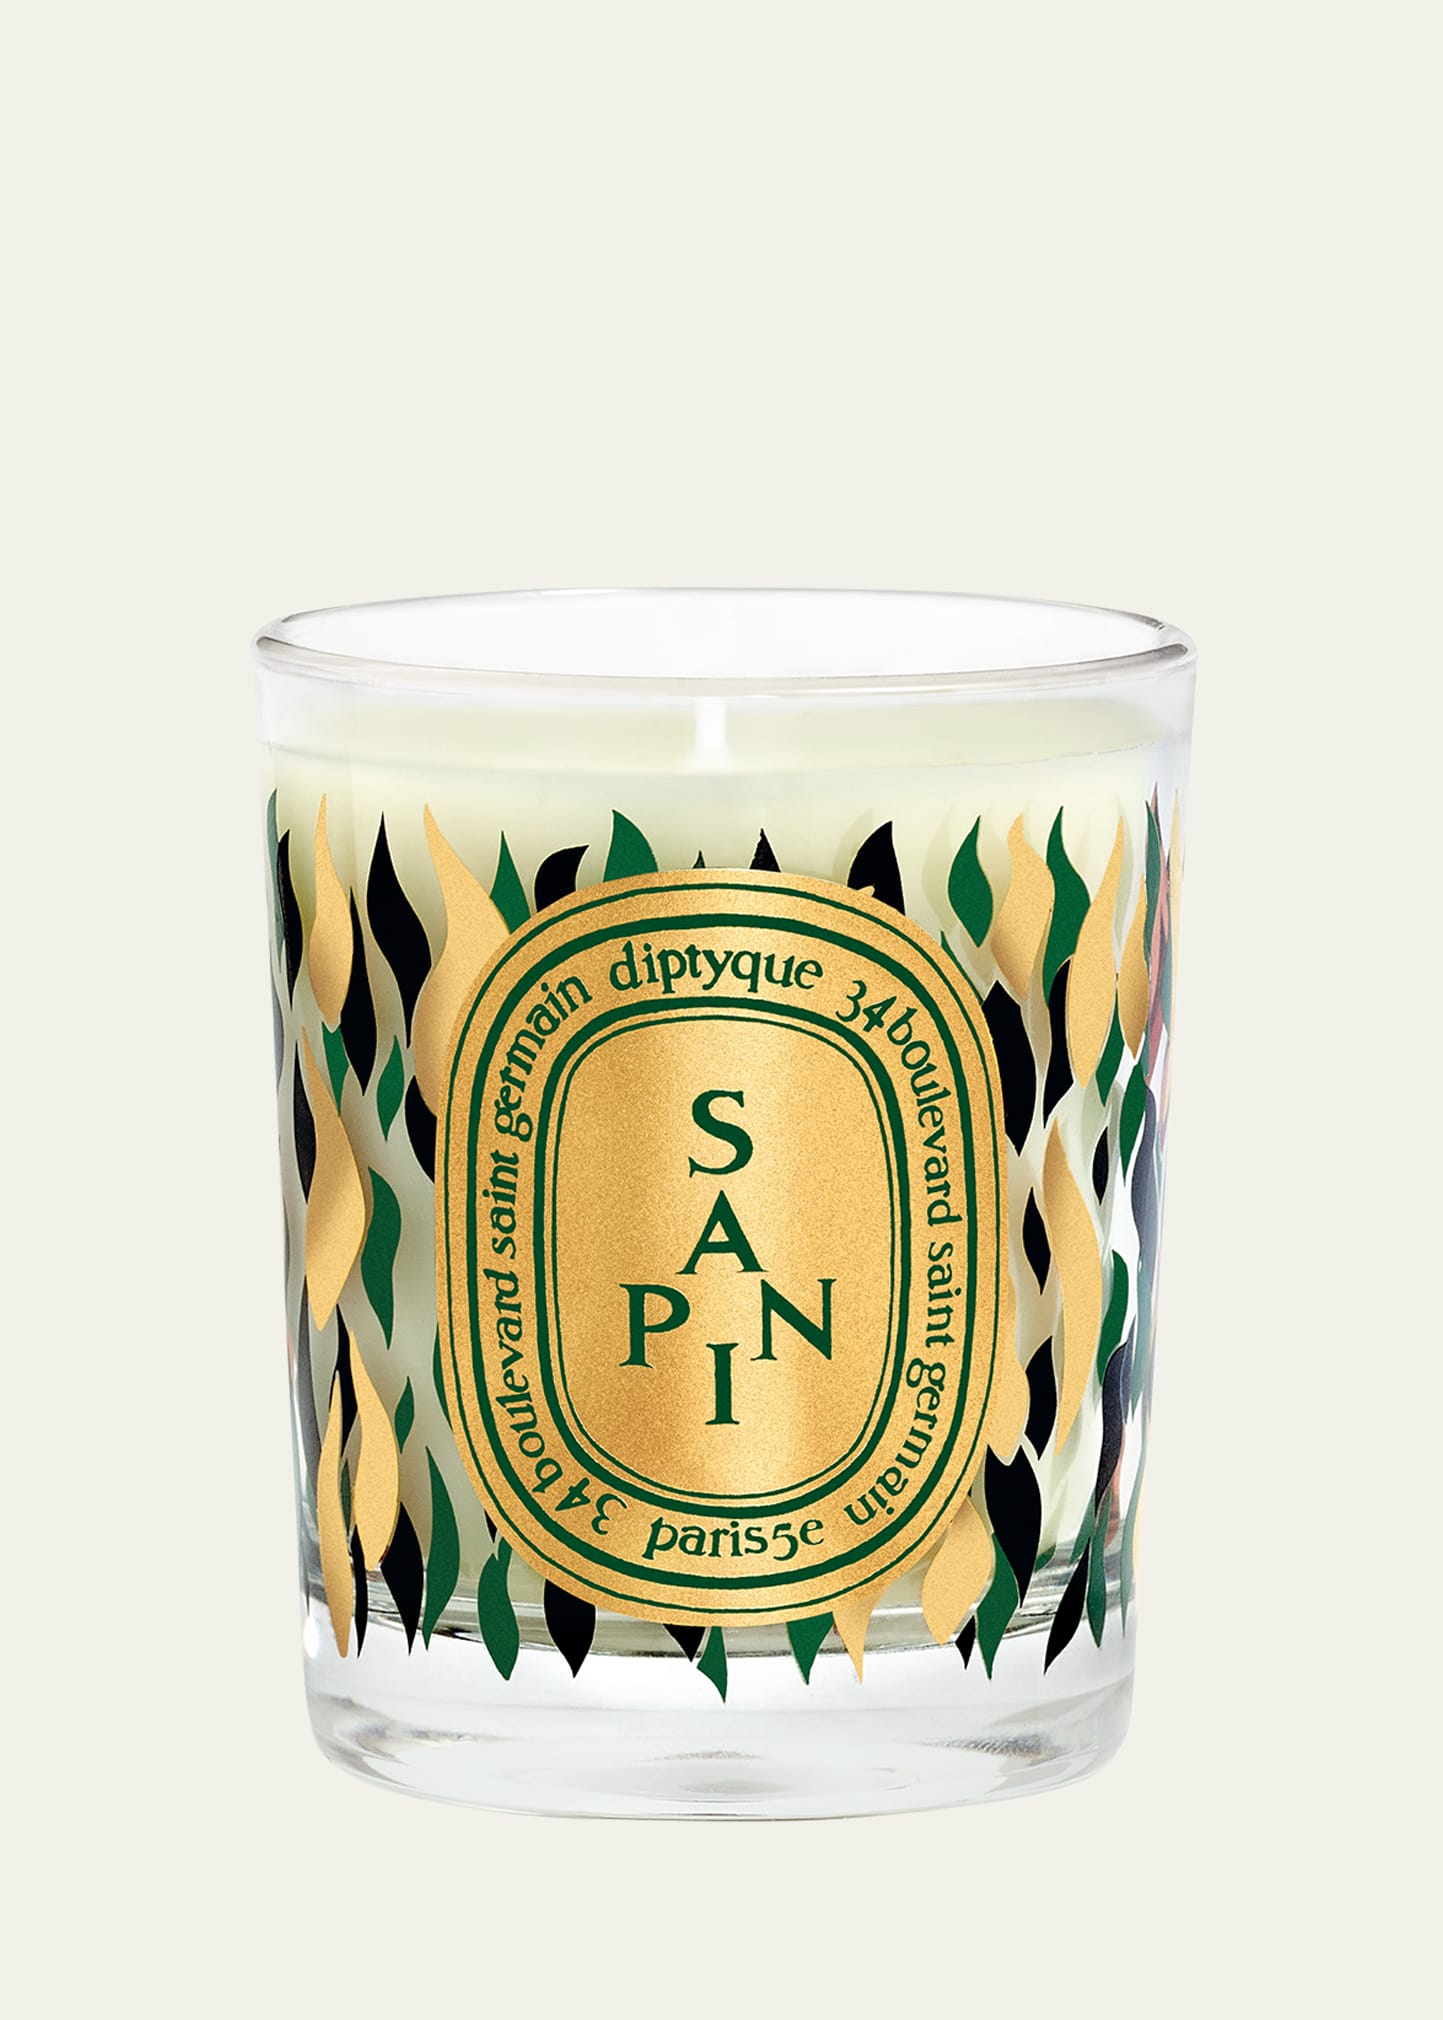 Sapin (Pine) Scented Candle - Limited Edition